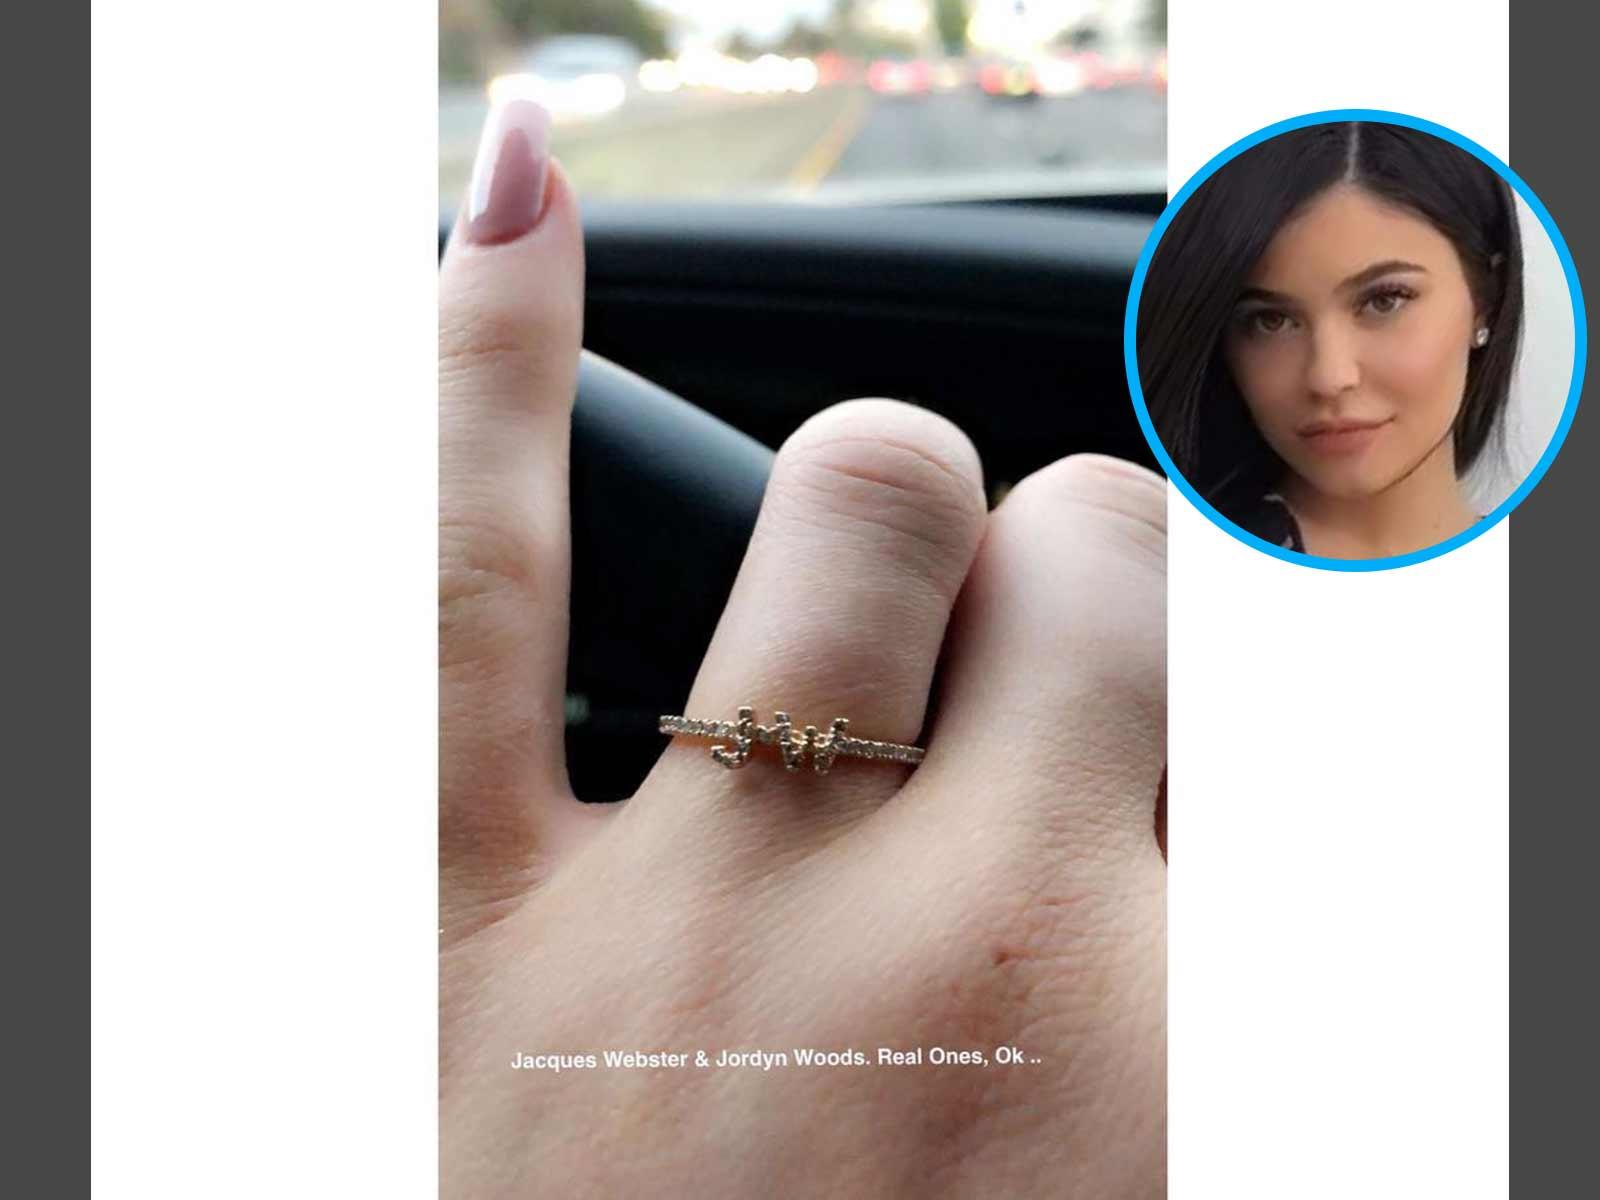 Kylie Jenner Wears ‘JW’ Initials on Ring Finger … But for Who???